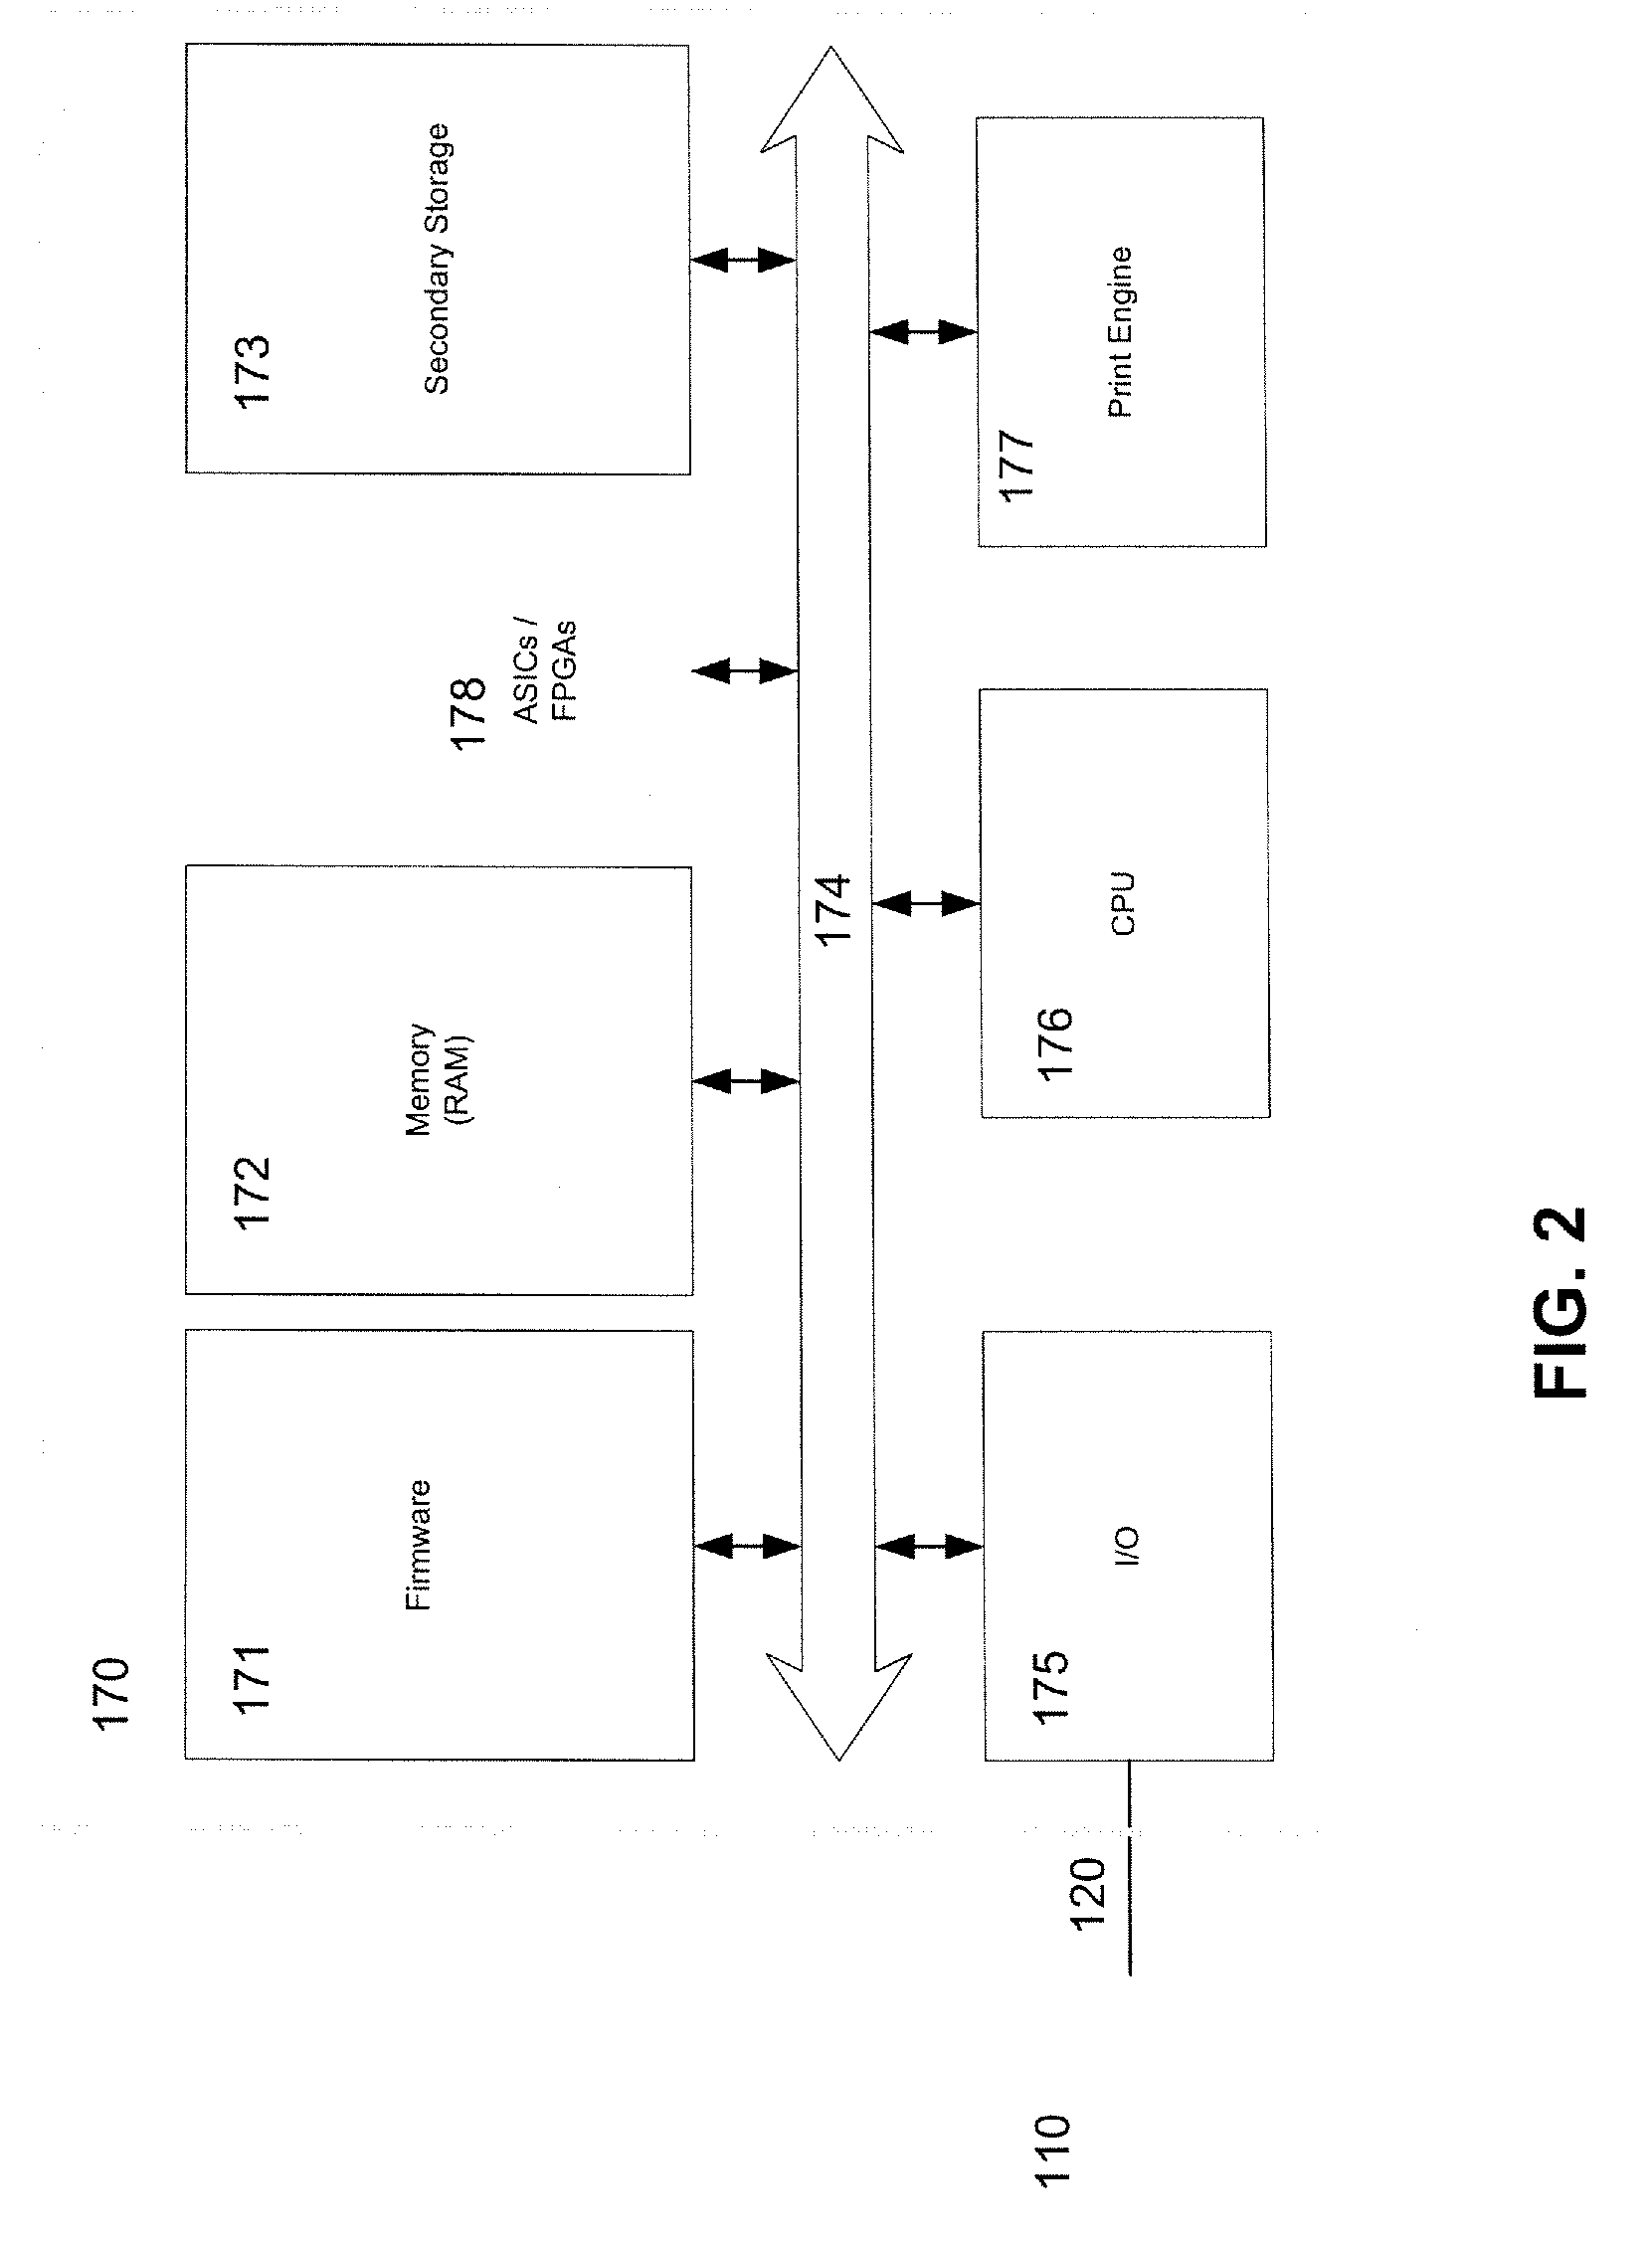 Systems and Methods for Optimal Memory Allocation Units